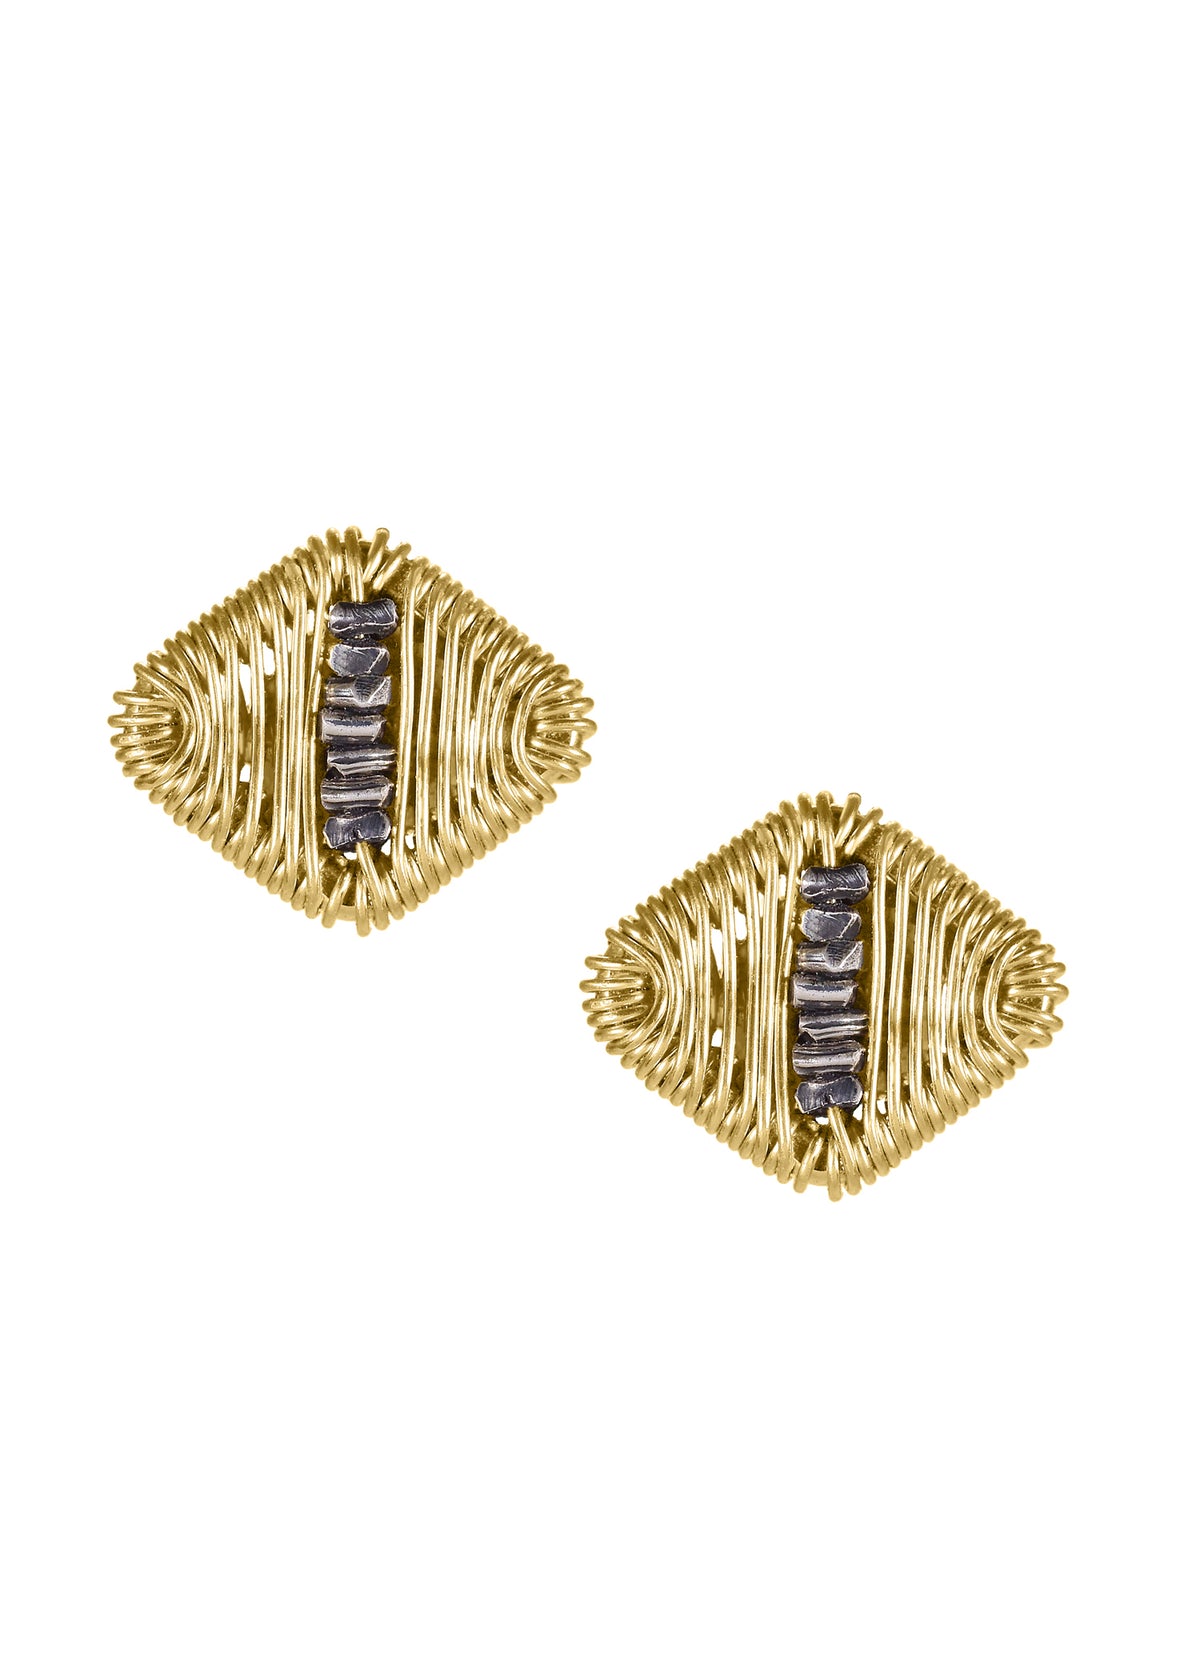 14k gold fill Sterling silver Mixed metal Earrings measure 3/8&quot; in length and 7/16&quot; in width Handmade in our Los Angeles studio